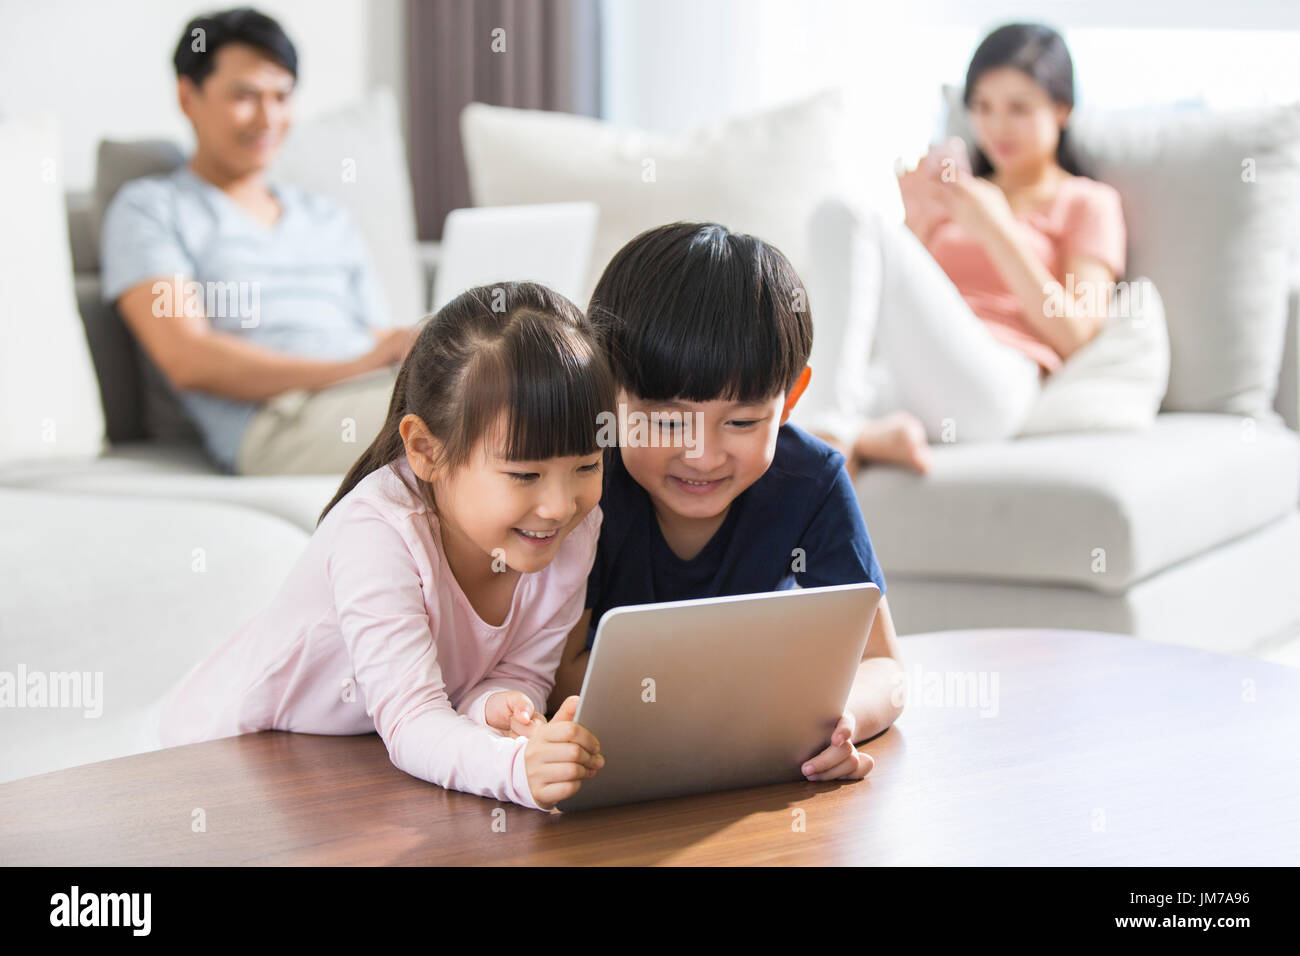 https://c8.alamy.com/comp/JM7A96/happy-young-chinese-family-using-digital-gadgets-at-home-JM7A96.jpg